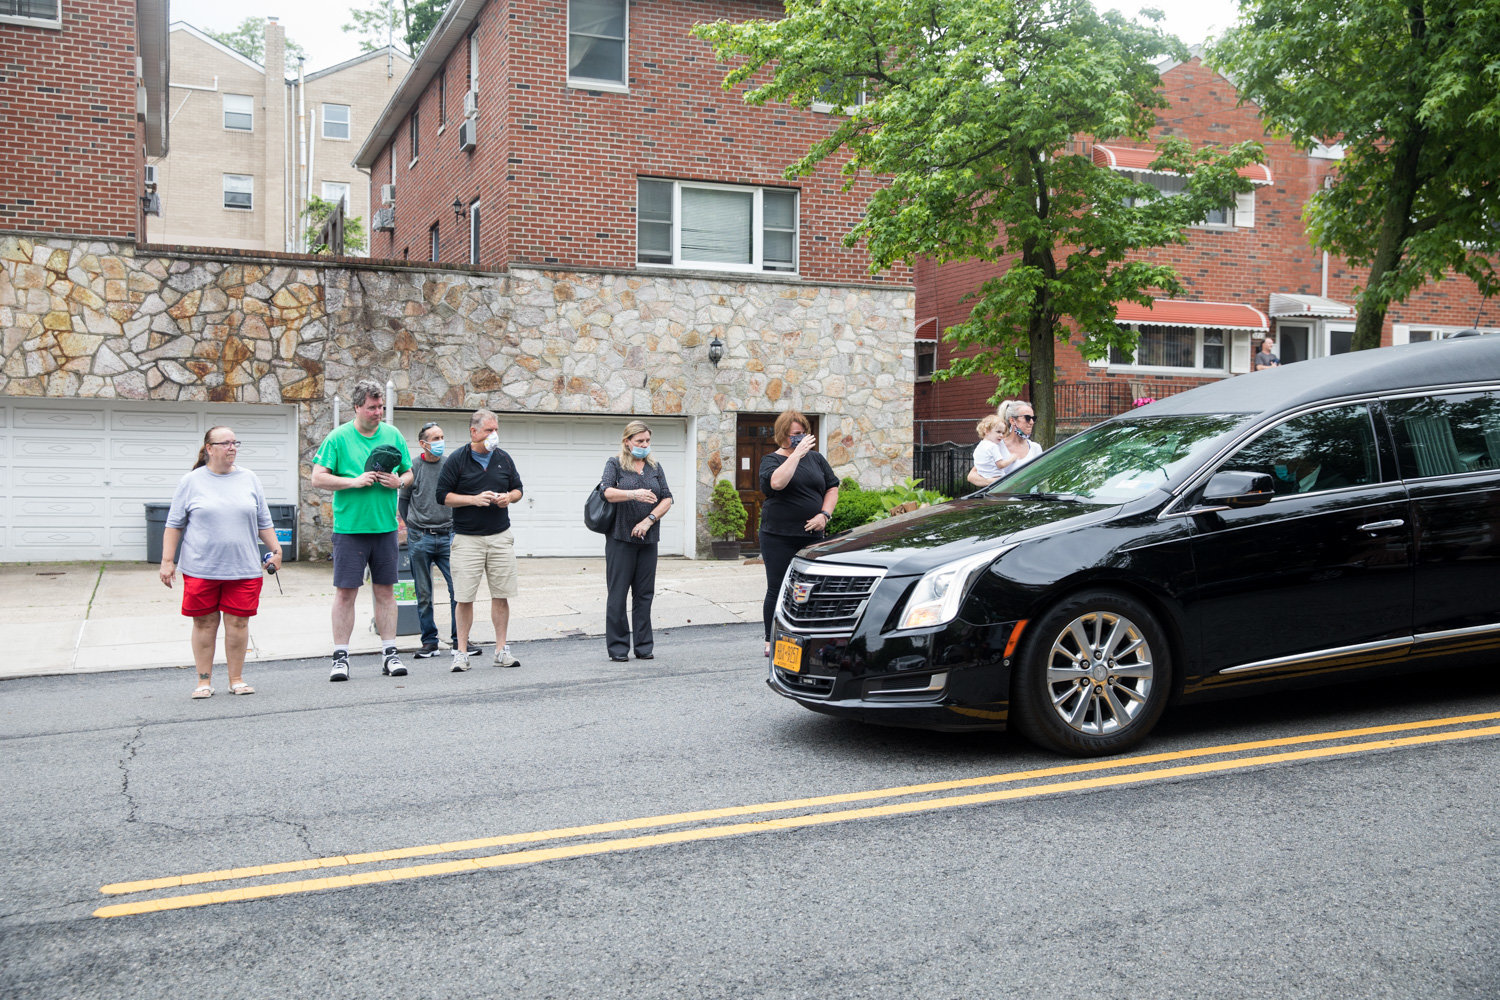 Mourners watch as a hearse carrying the late Michael Rooney makes its way down Mosholu Avenue where Rooney lived. A lifelong Riverdale resident, Rooney died June 3 at 65.